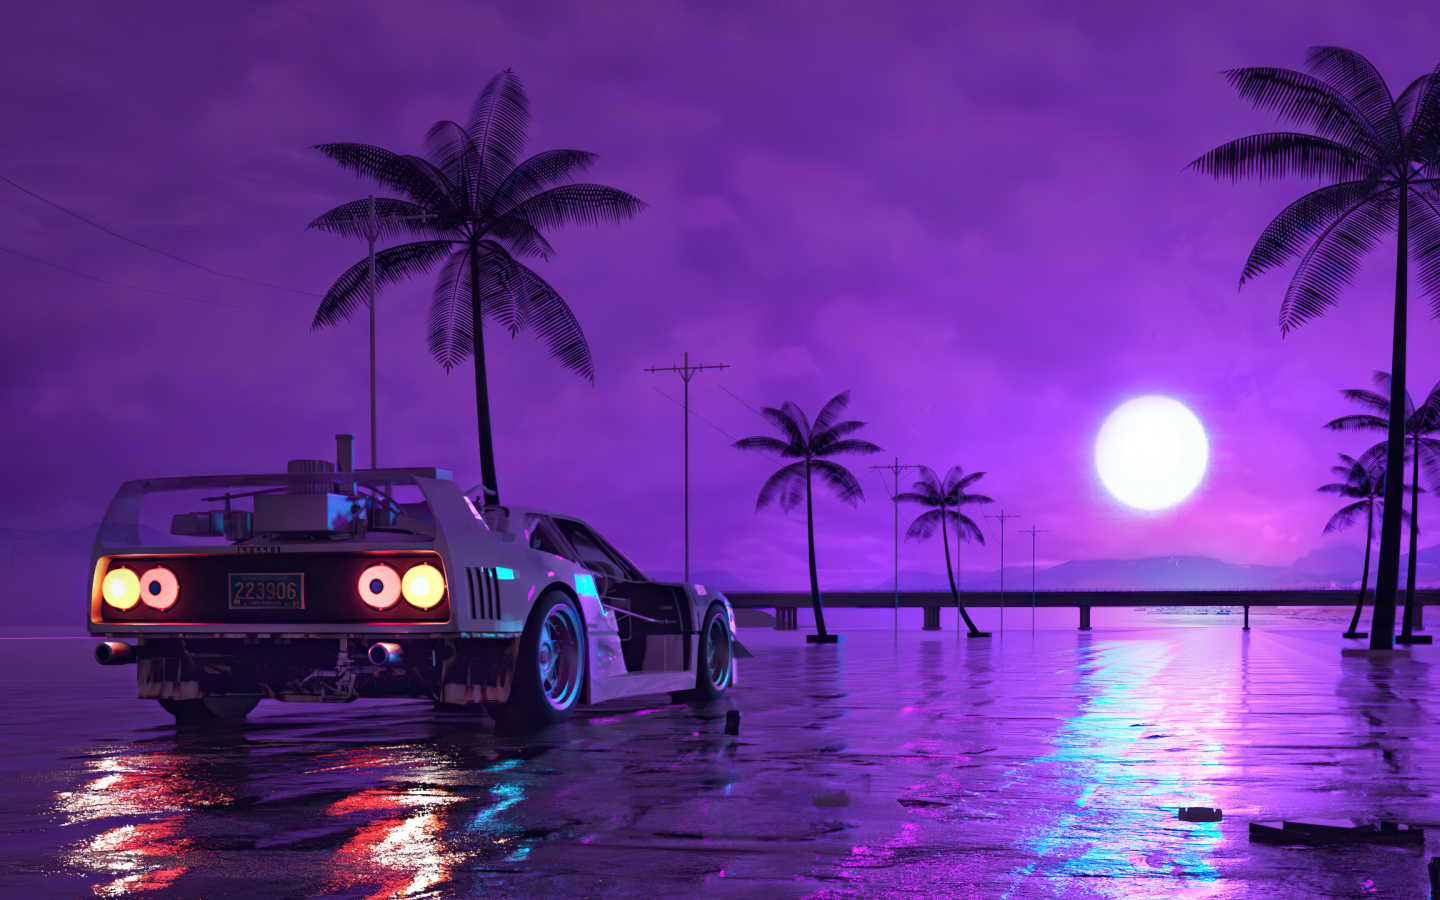 1440x900-resolution-retro-wave-sunset-and-running-car-1440x900